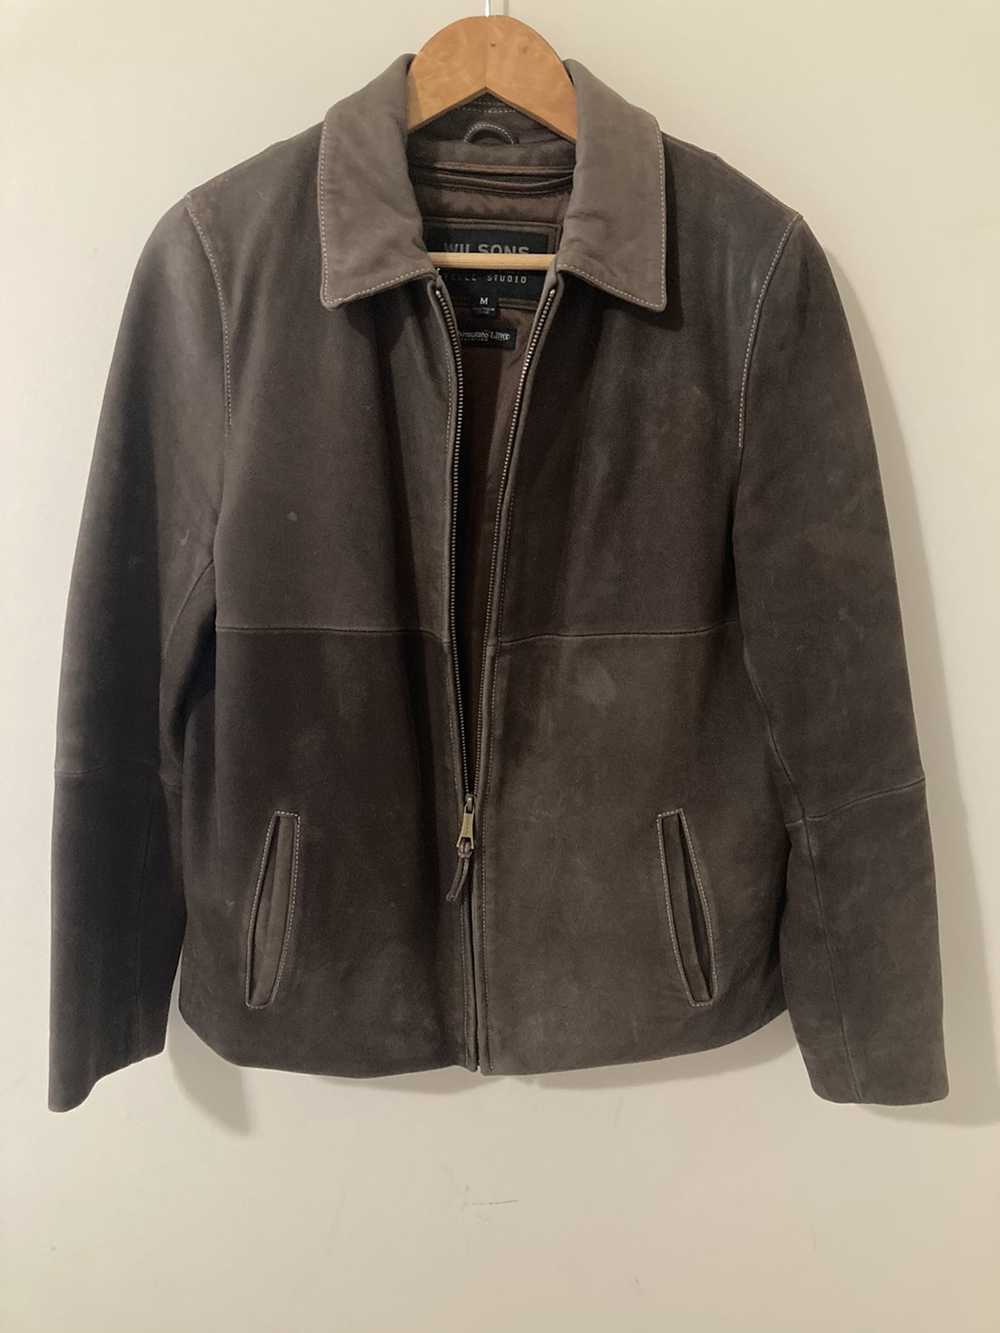 Wilsons Leather Wilsons Leather Jacket Size M - image 1